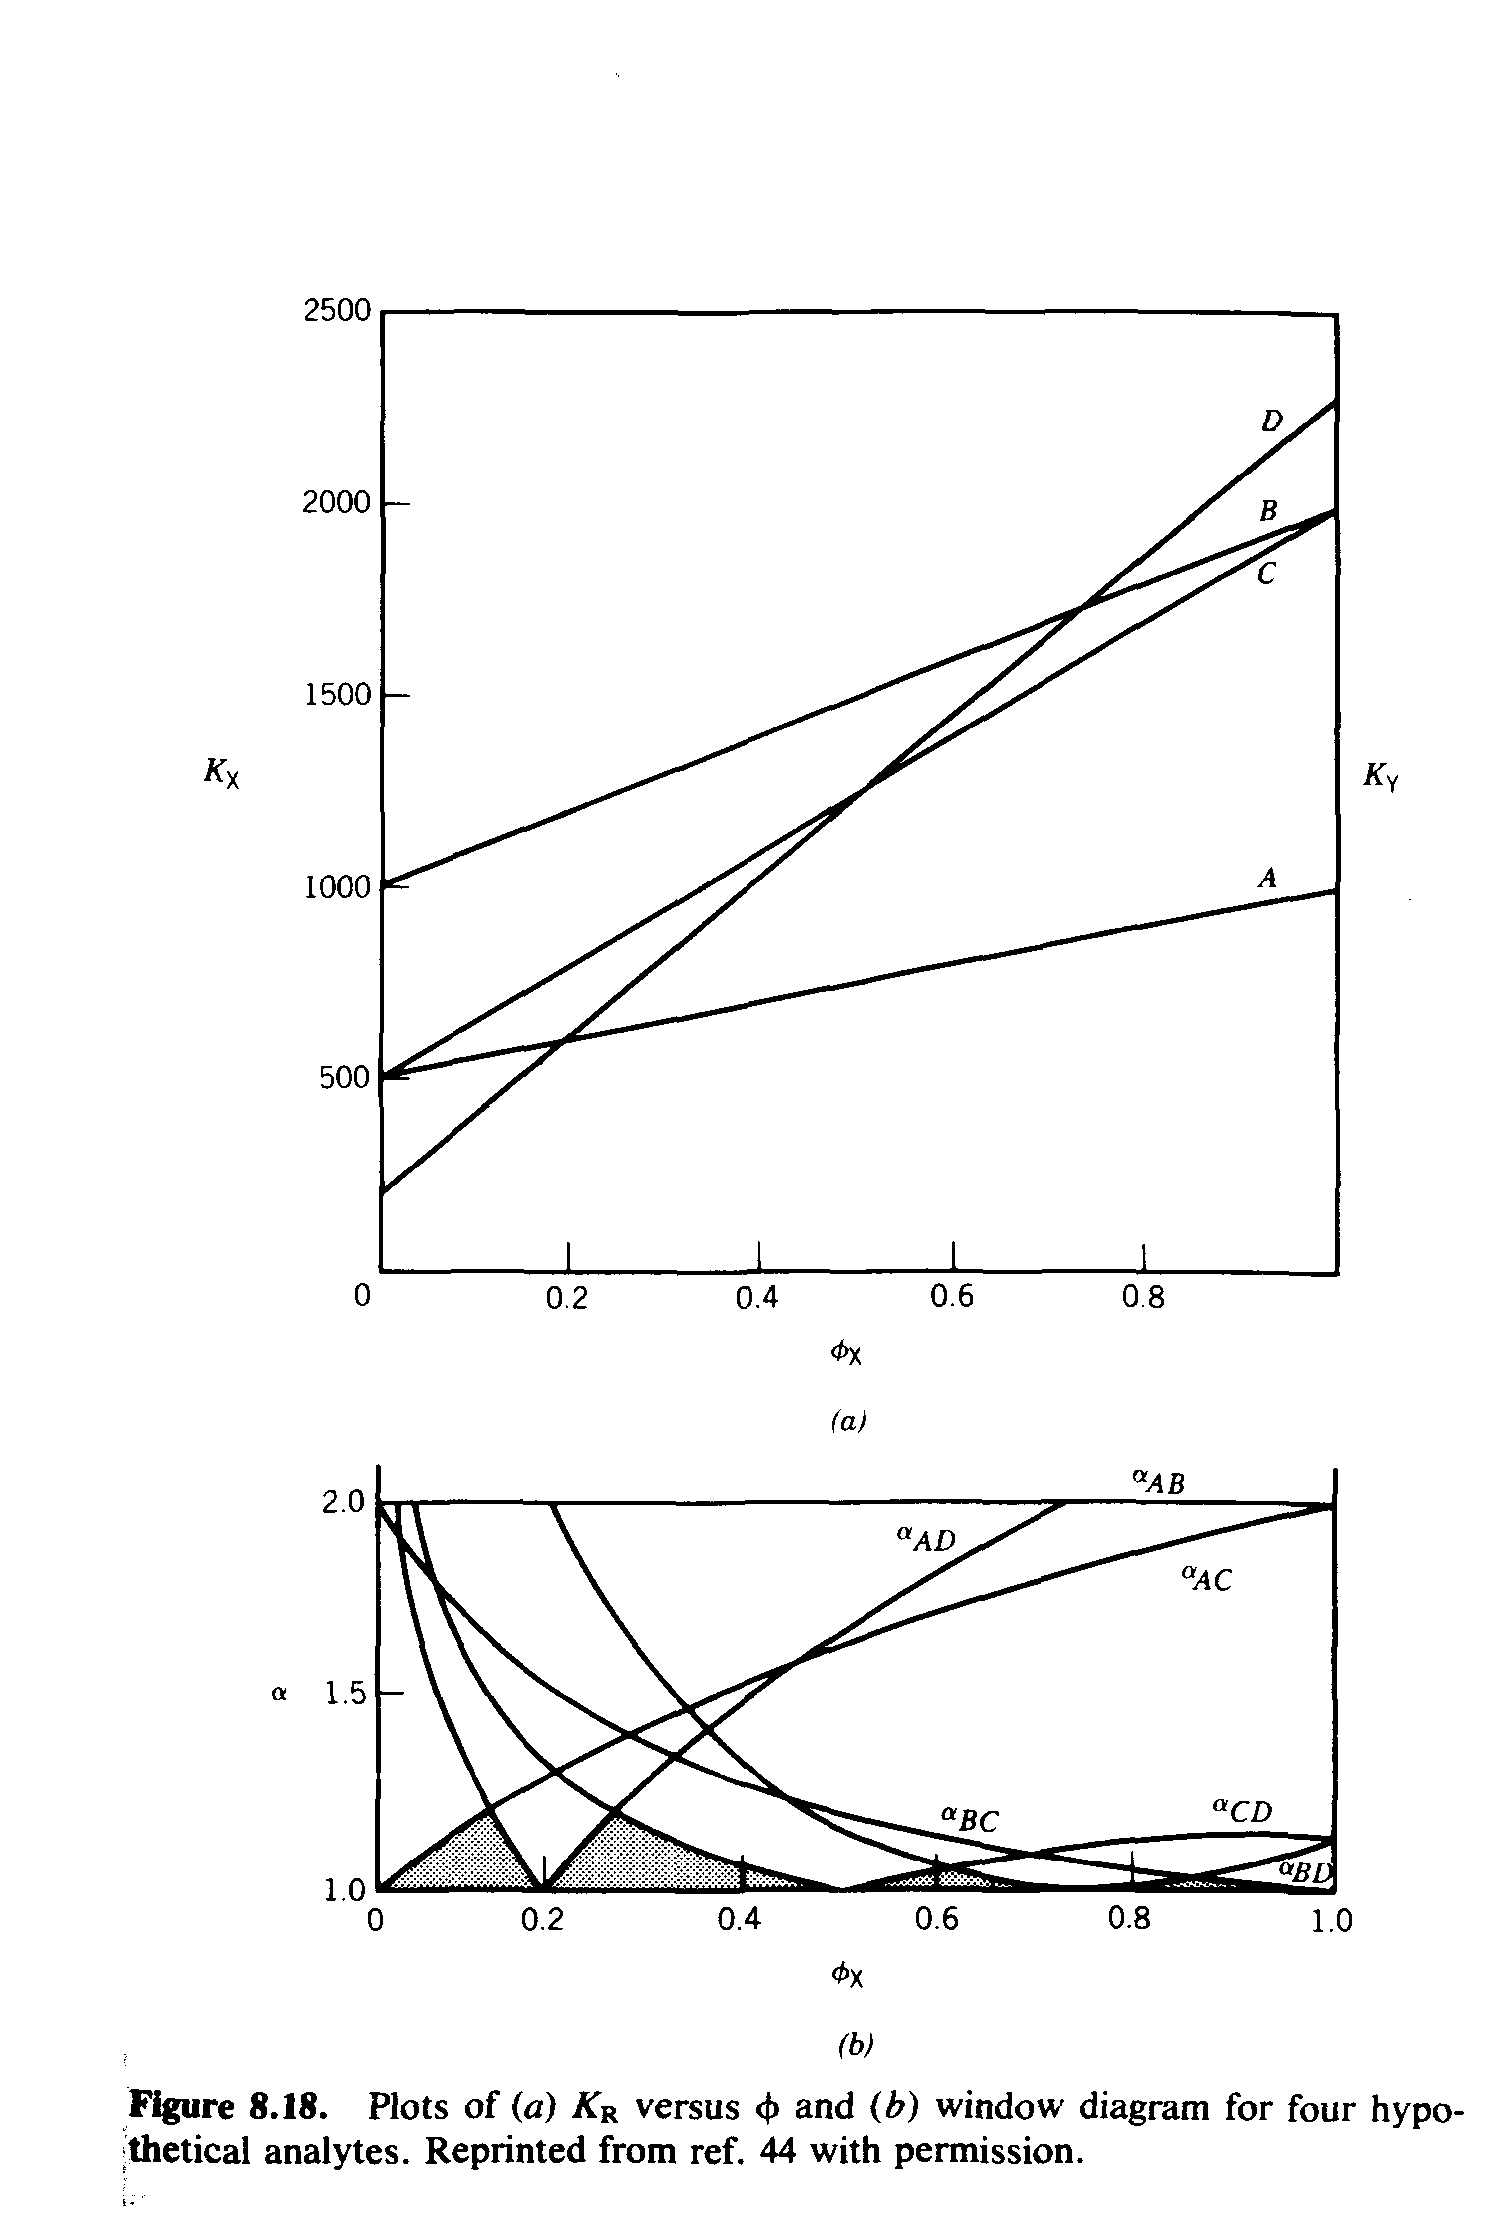 Figure 8.18. Plots of (a) KR versus <t> and (b) window diagram for four hypothetical analytes. Reprinted from ref. 44 with permission.